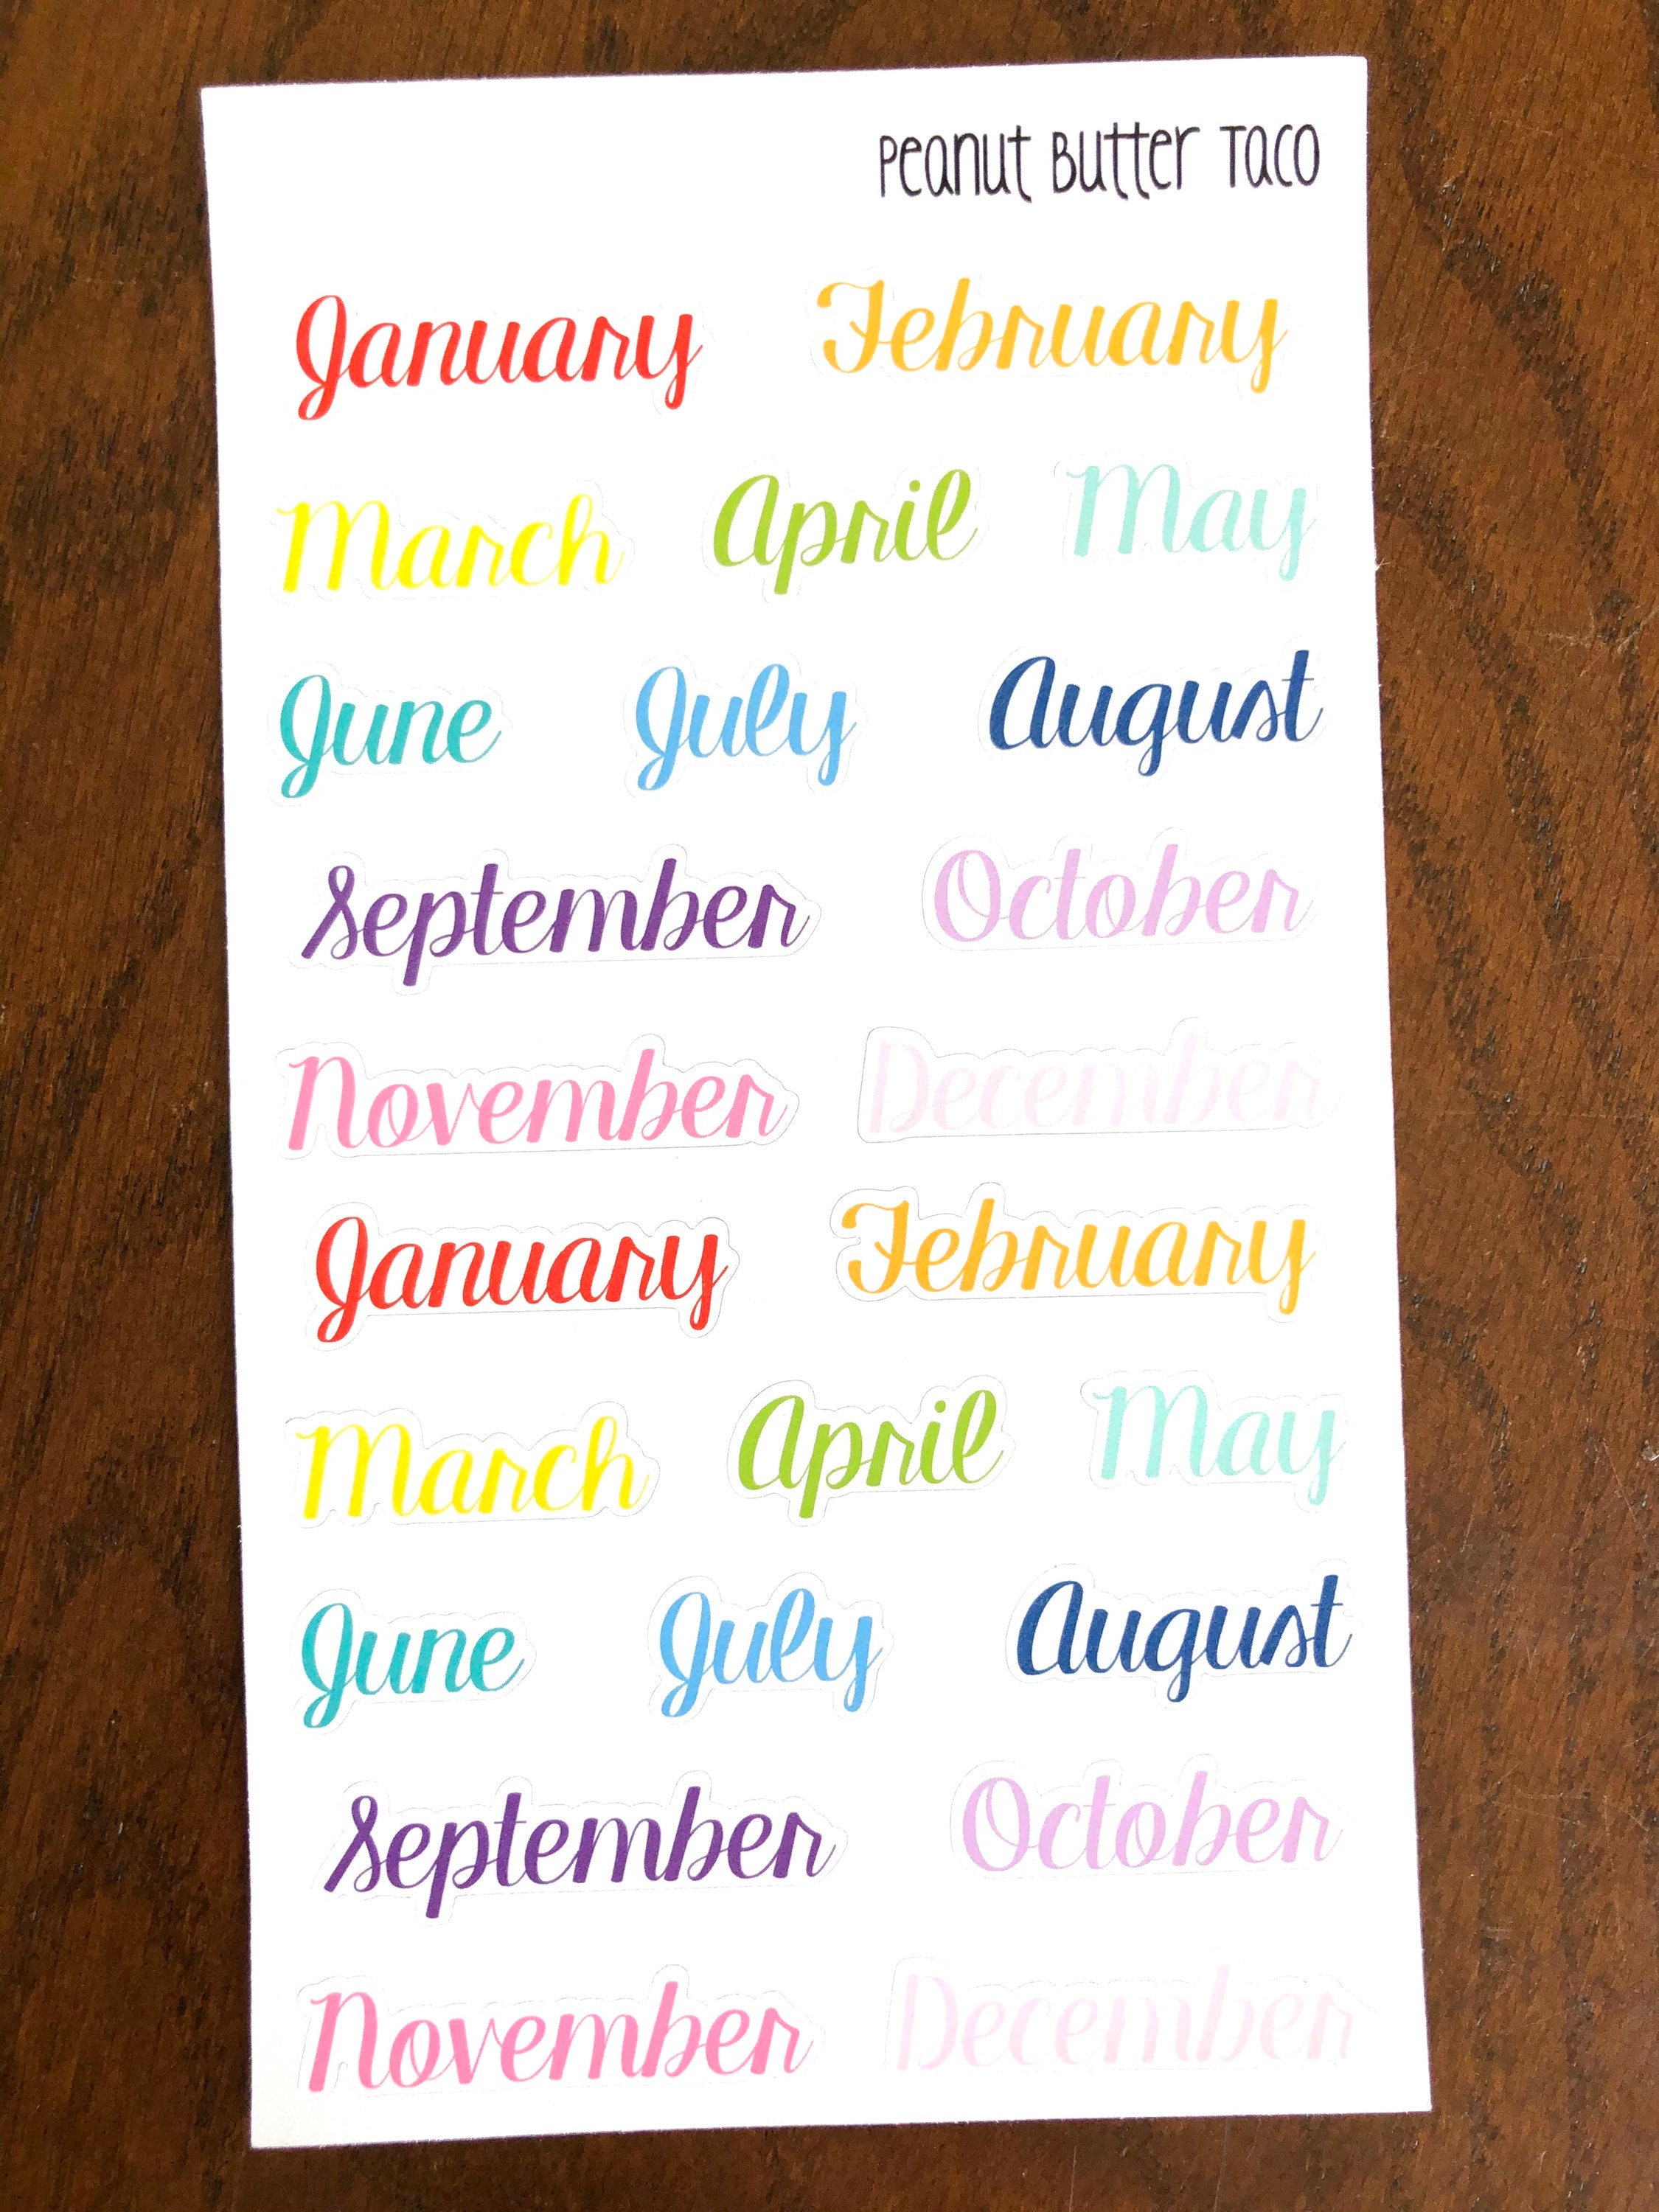 MONTHLY STICKERS - 3001 - Month Planner Stickers - Months of the Year –  StickerMama